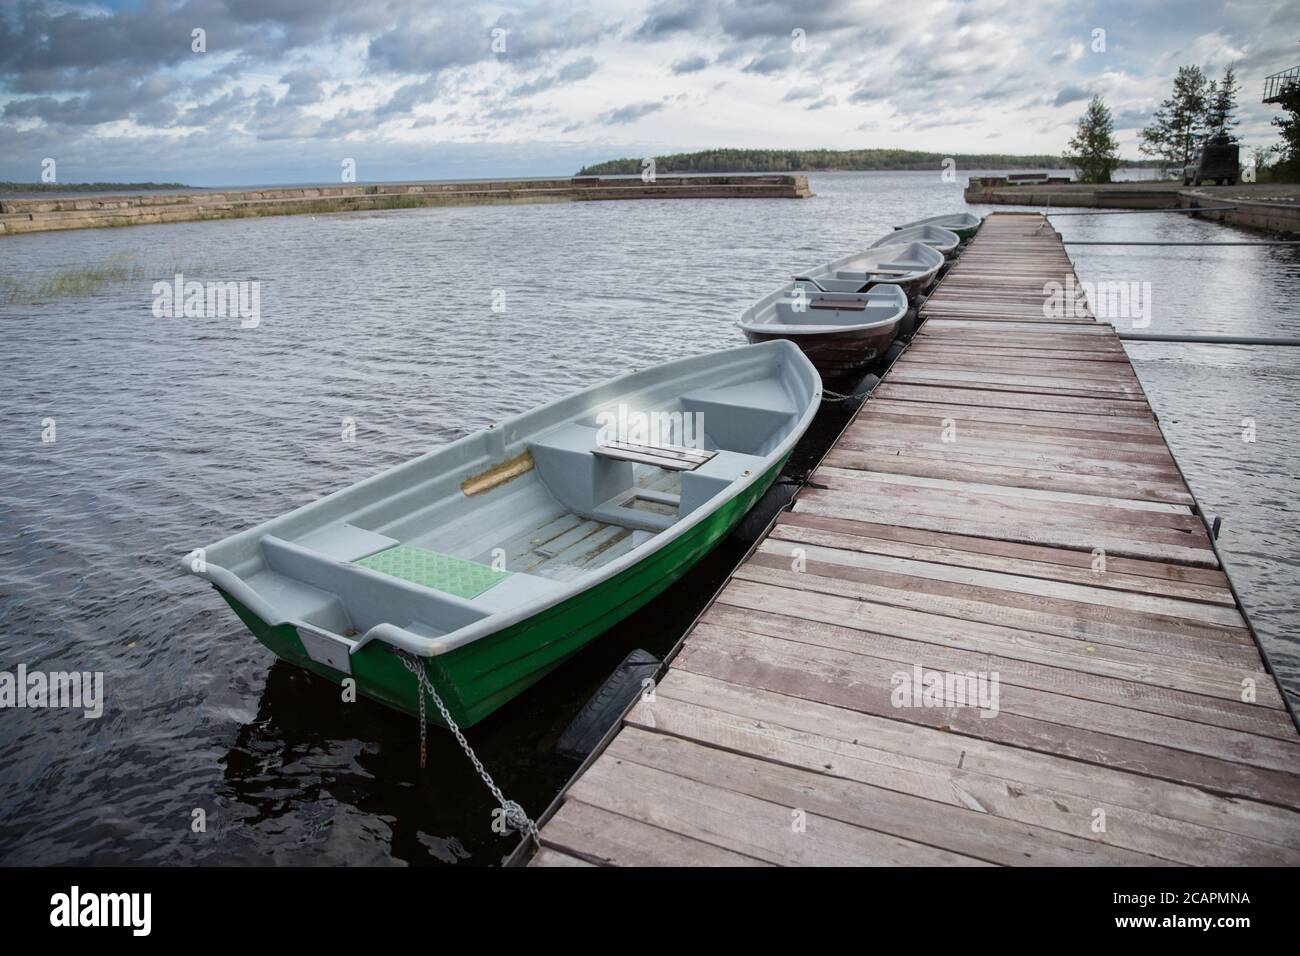 Green empty boats on the lake along the wooden pier, cloudy autumn sky against the background. Stock Photo